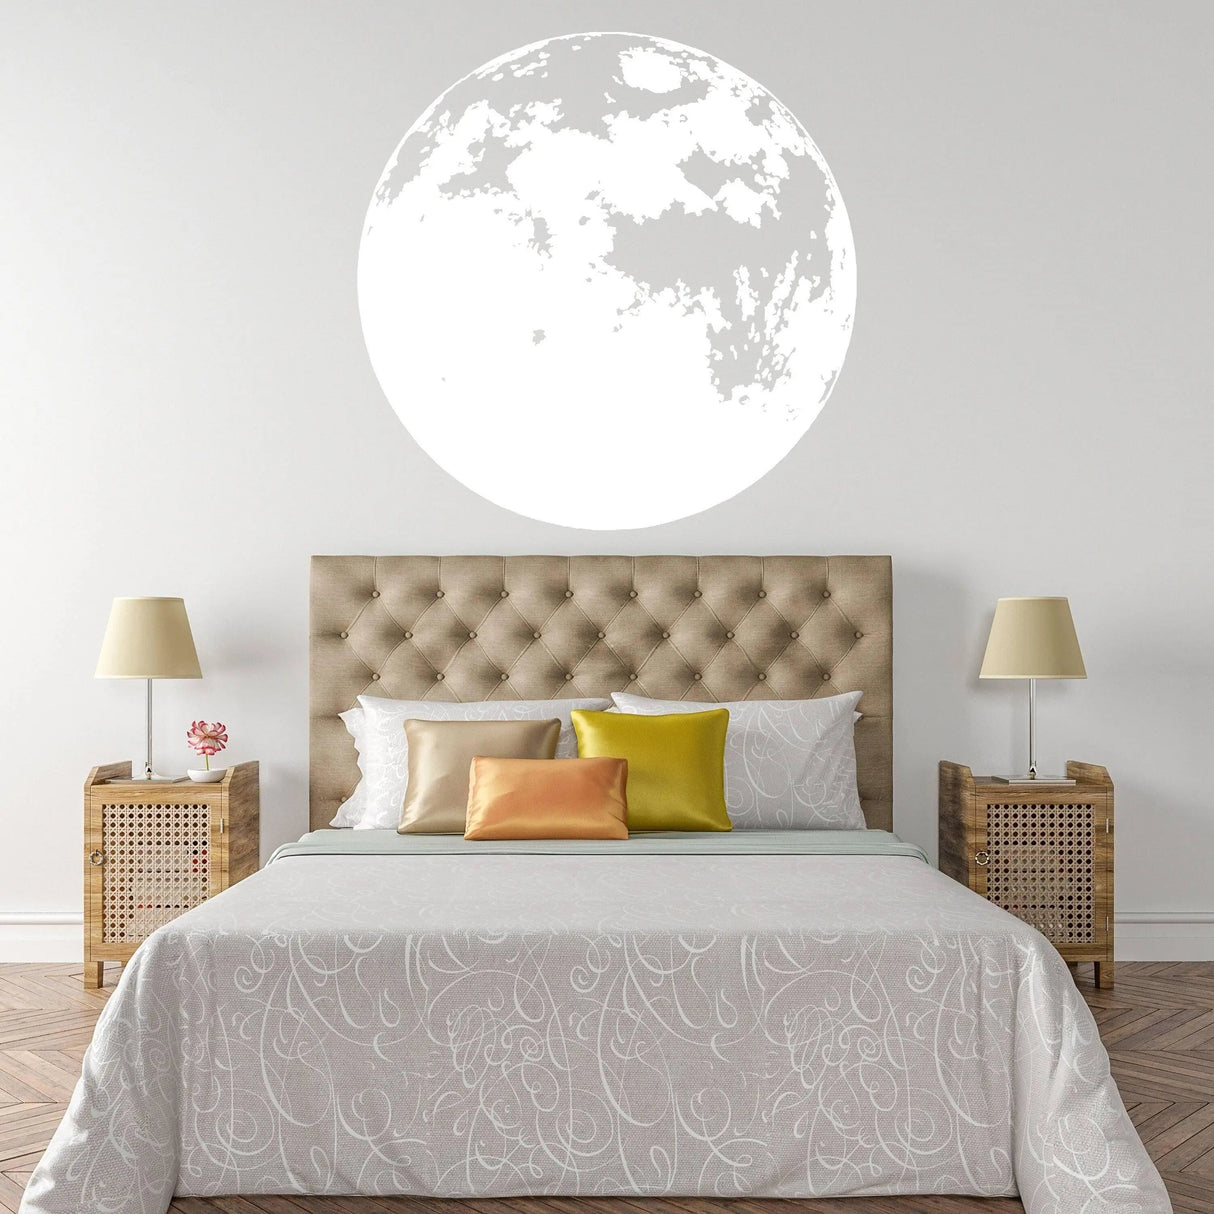 Glow In Dark Moon Wall Decor Decal - Nigh Light Full Large Sticker For Nursery Baby Kids Room - Glowing Neon Art Home Removable Vinyl - Decords